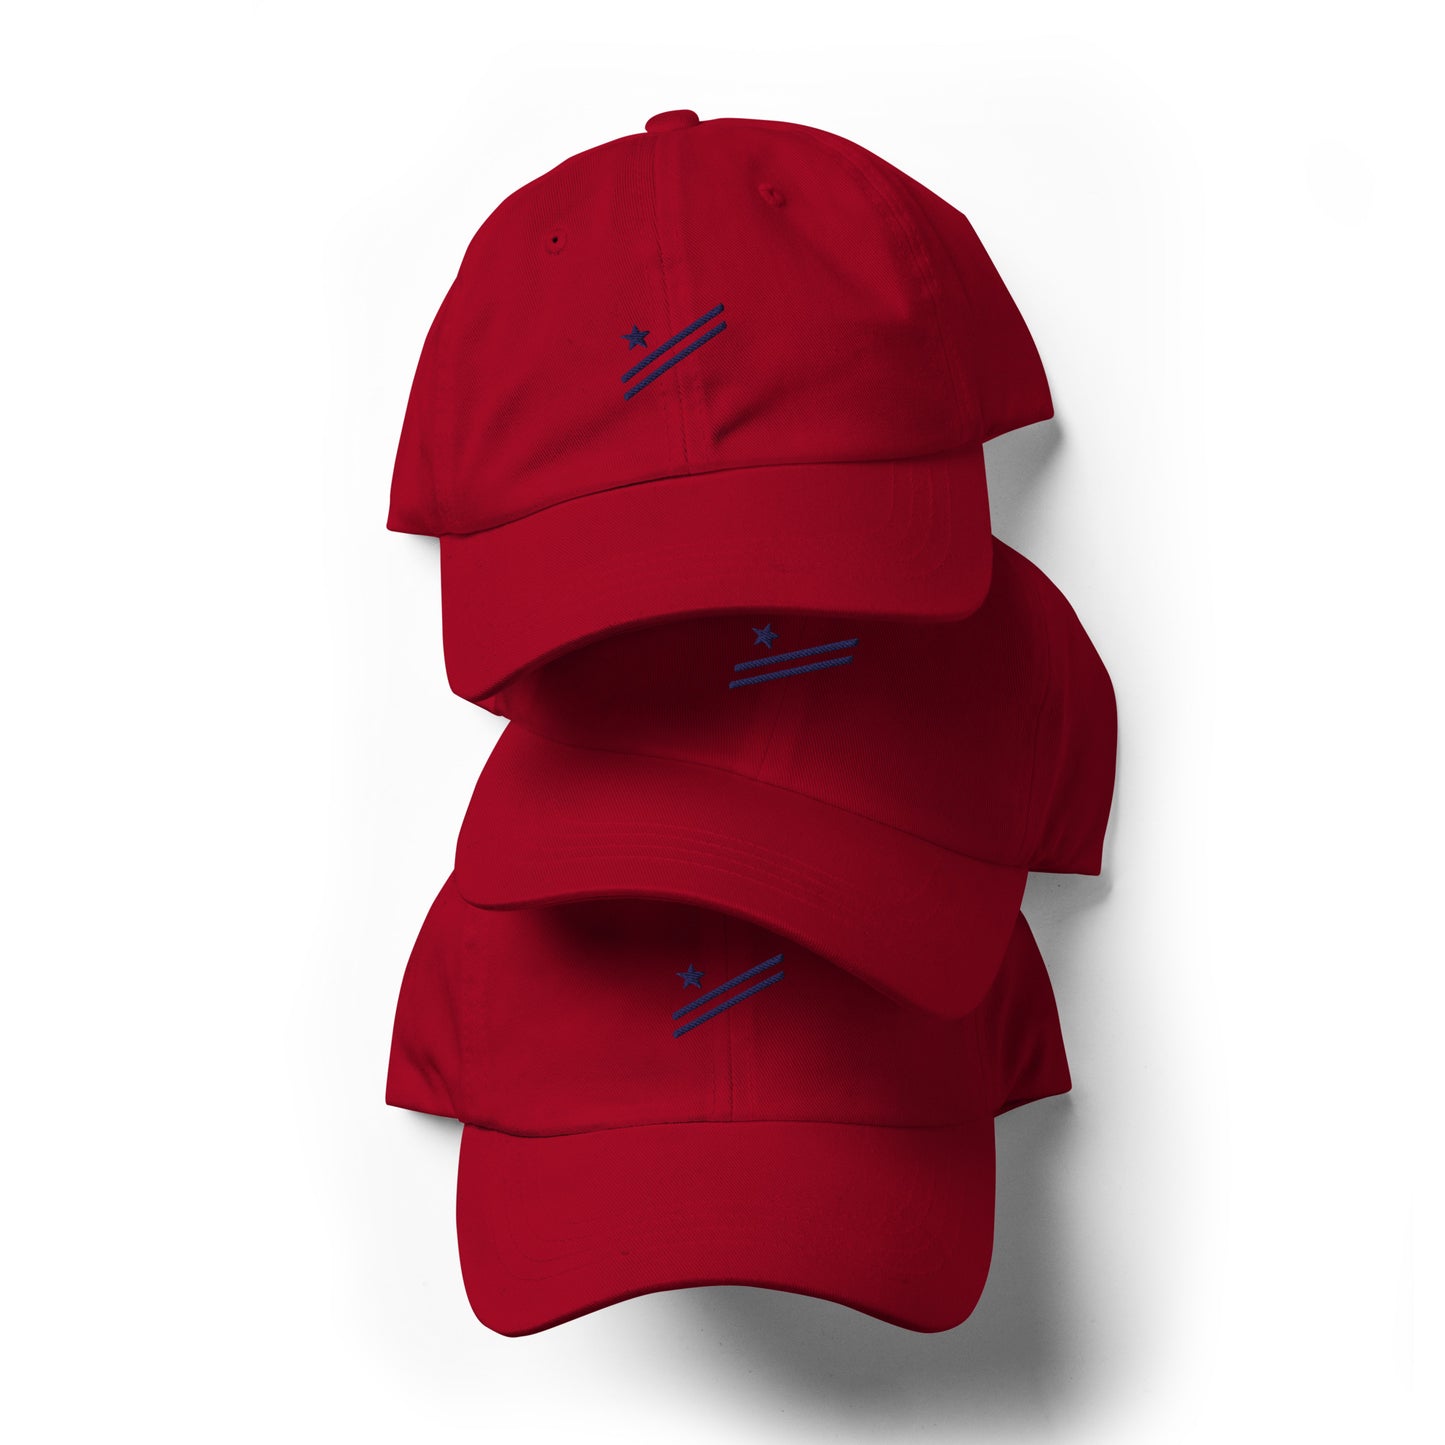 Martyrs - Classic Dad hat - NAVY FLAG broderie